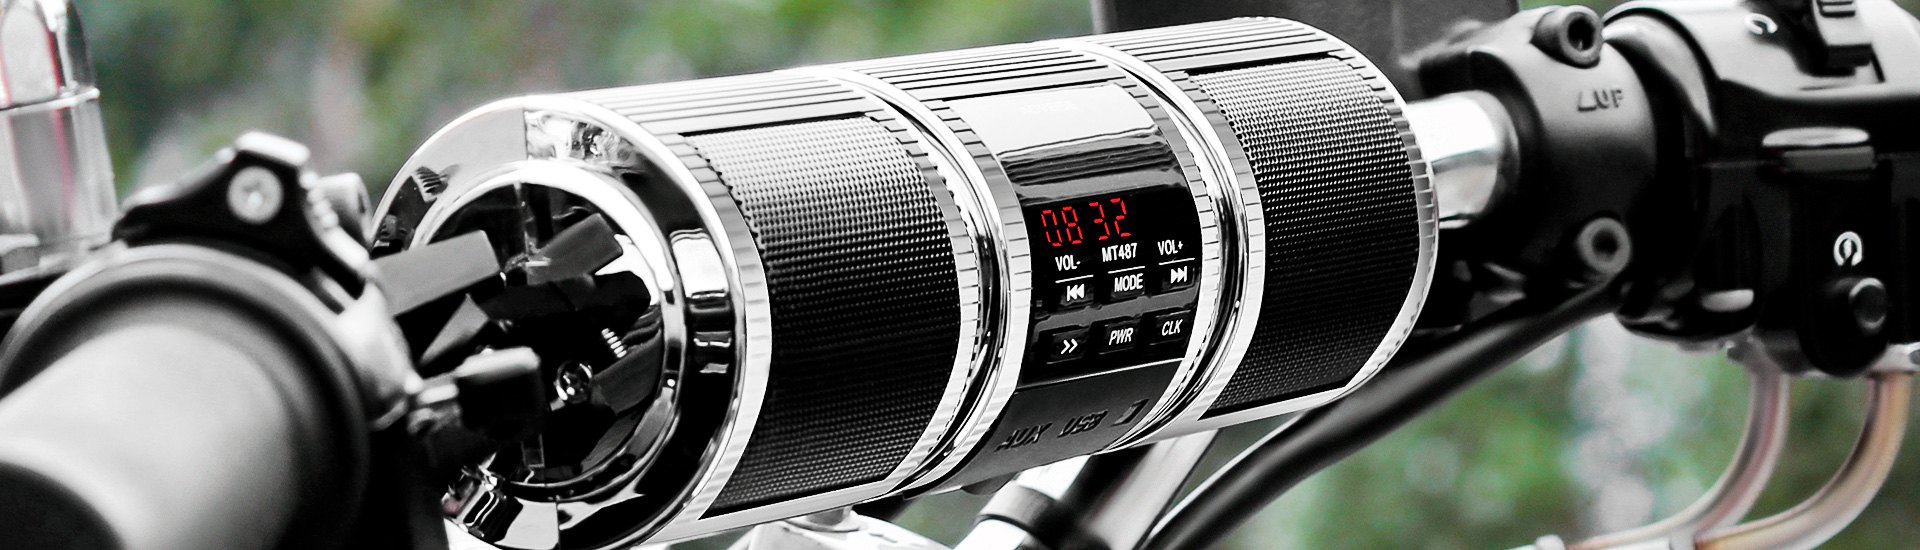 Sport/Street Bike Sound Systems | Speakers, Stereos, Amplifiers, Radios